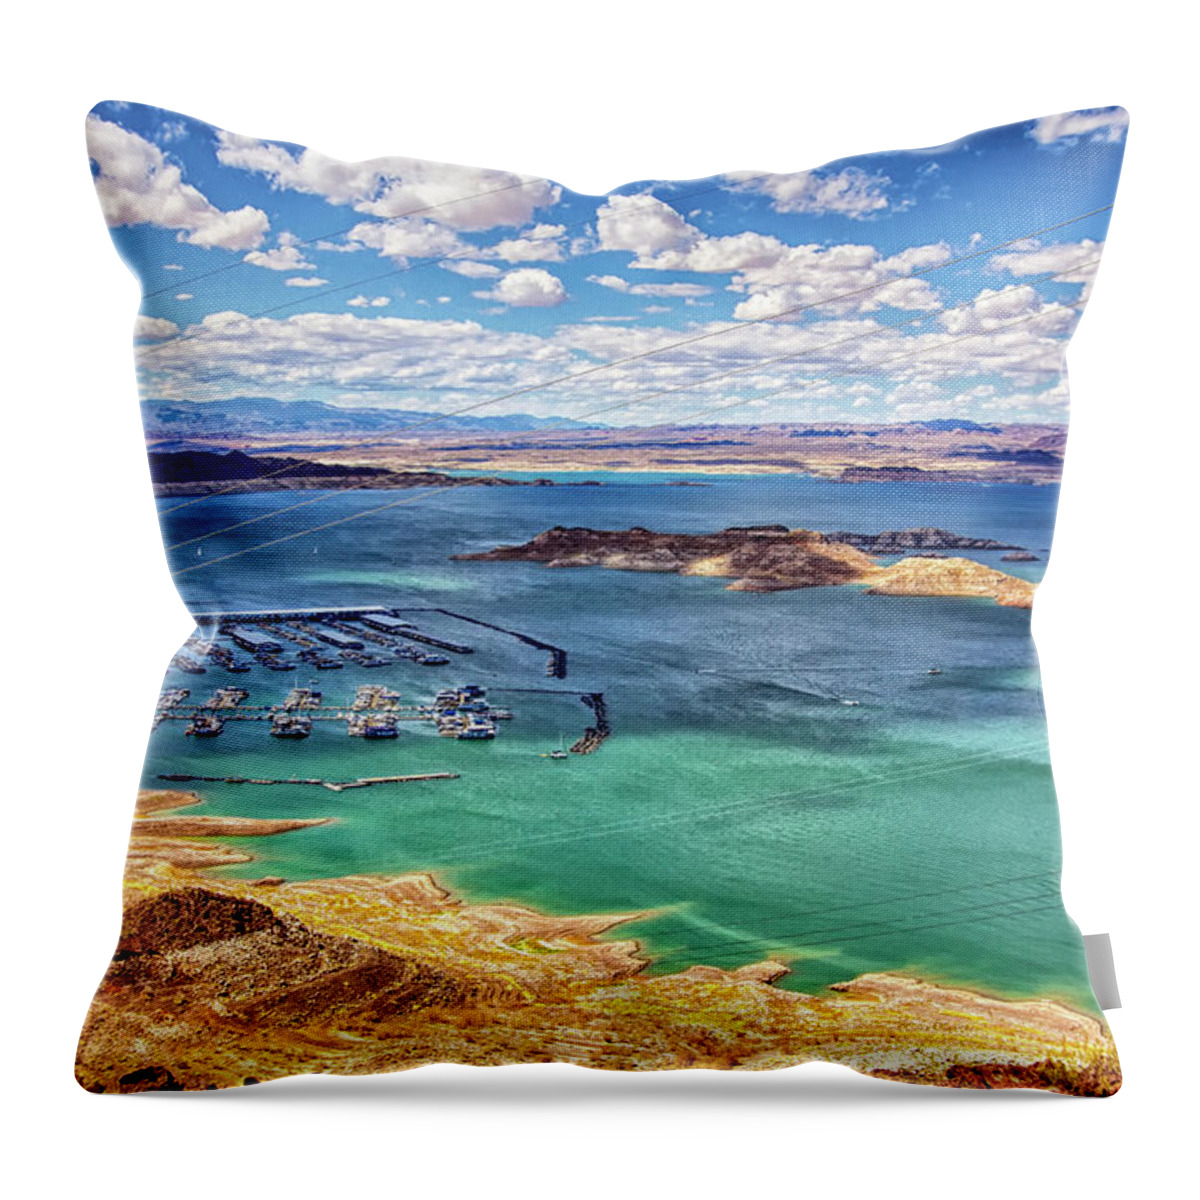 Lake Mead Throw Pillow featuring the photograph Lake Mead, Nevada by Tatiana Travelways